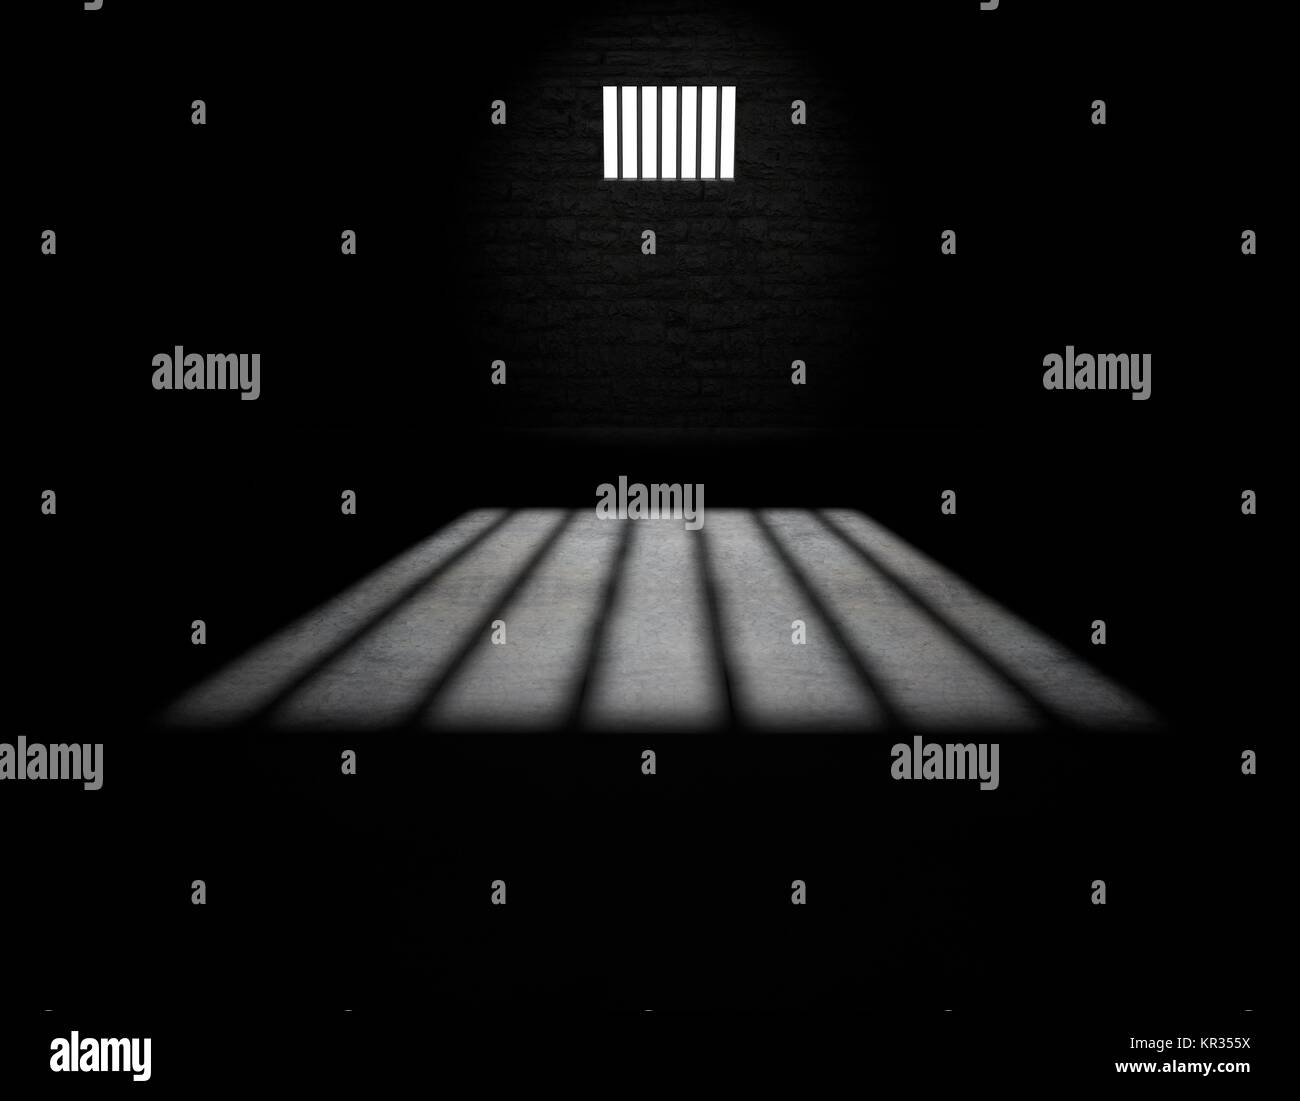 Security bars inside a window Black and White Stock Photos & Images - Alamy